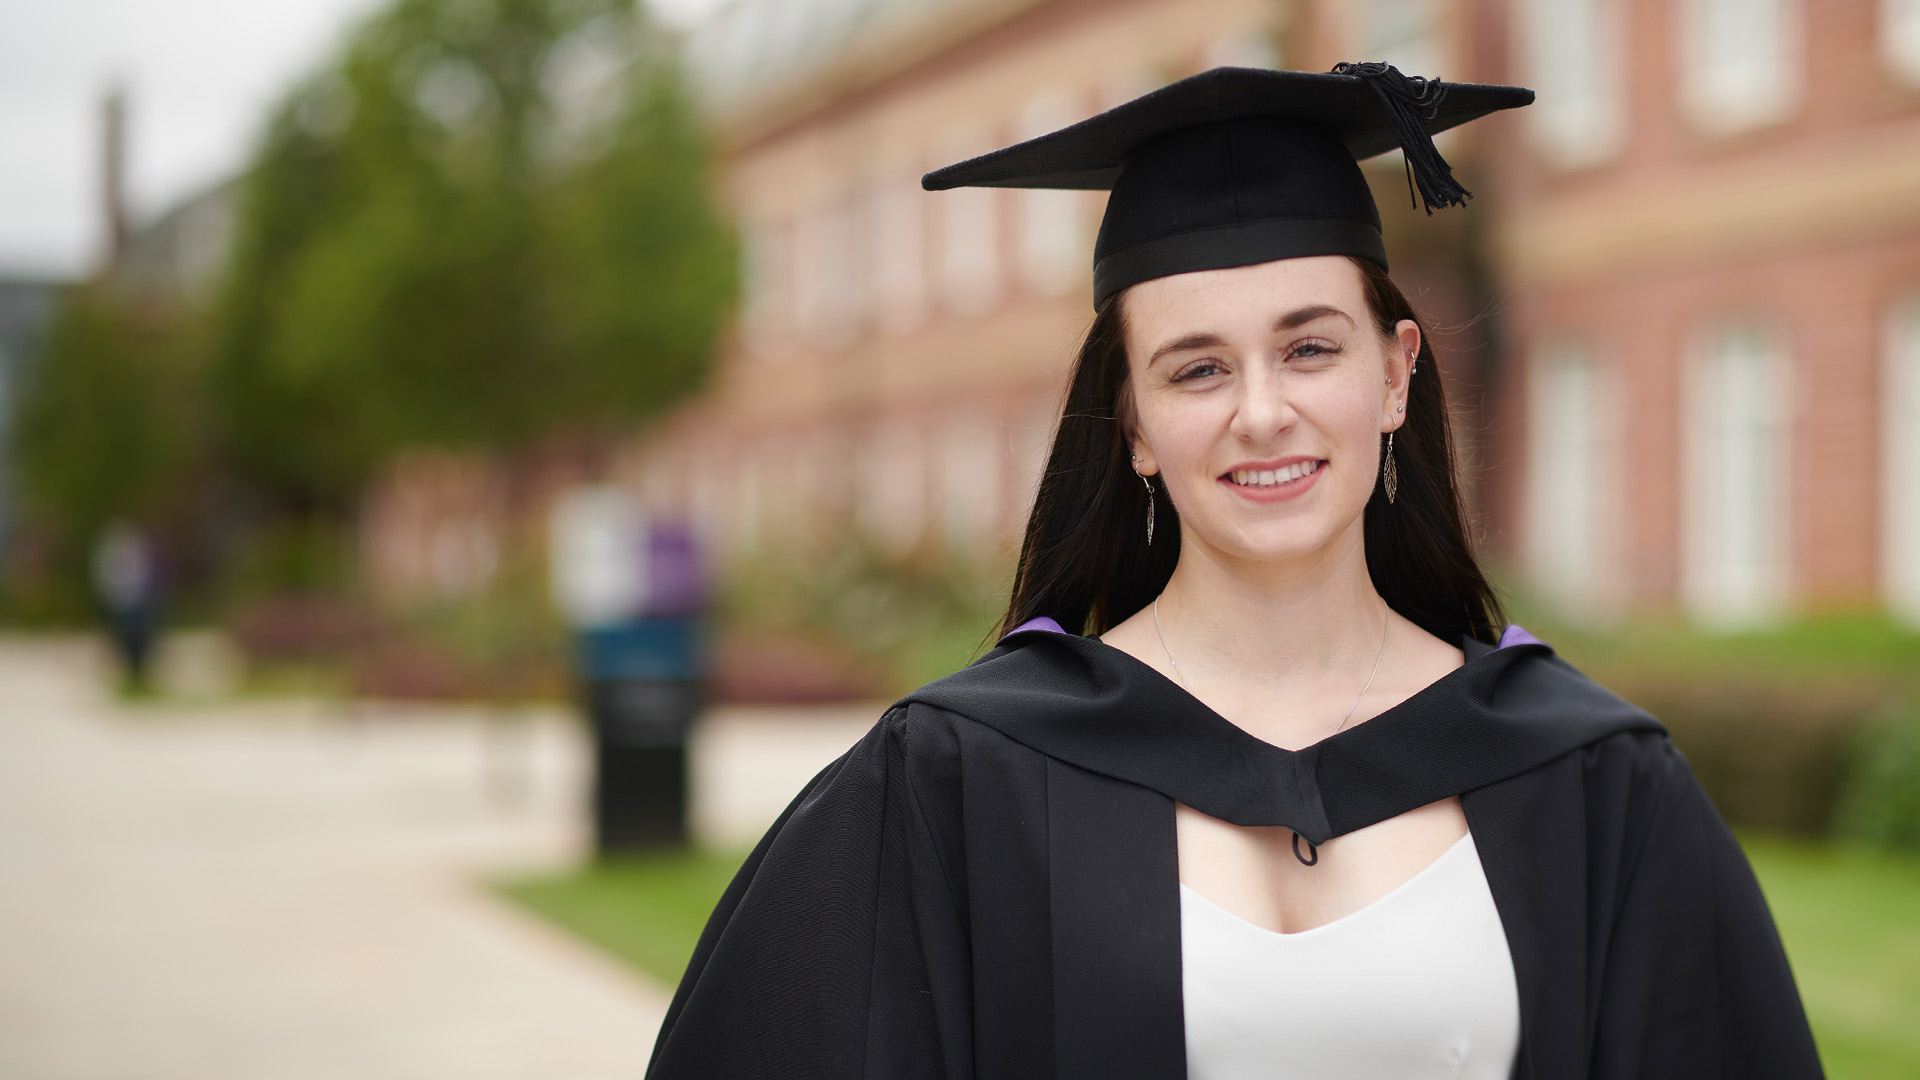 Rachel Redhead wearing a cap and gown and smiling at the camera. Edge Hill University is in the background.